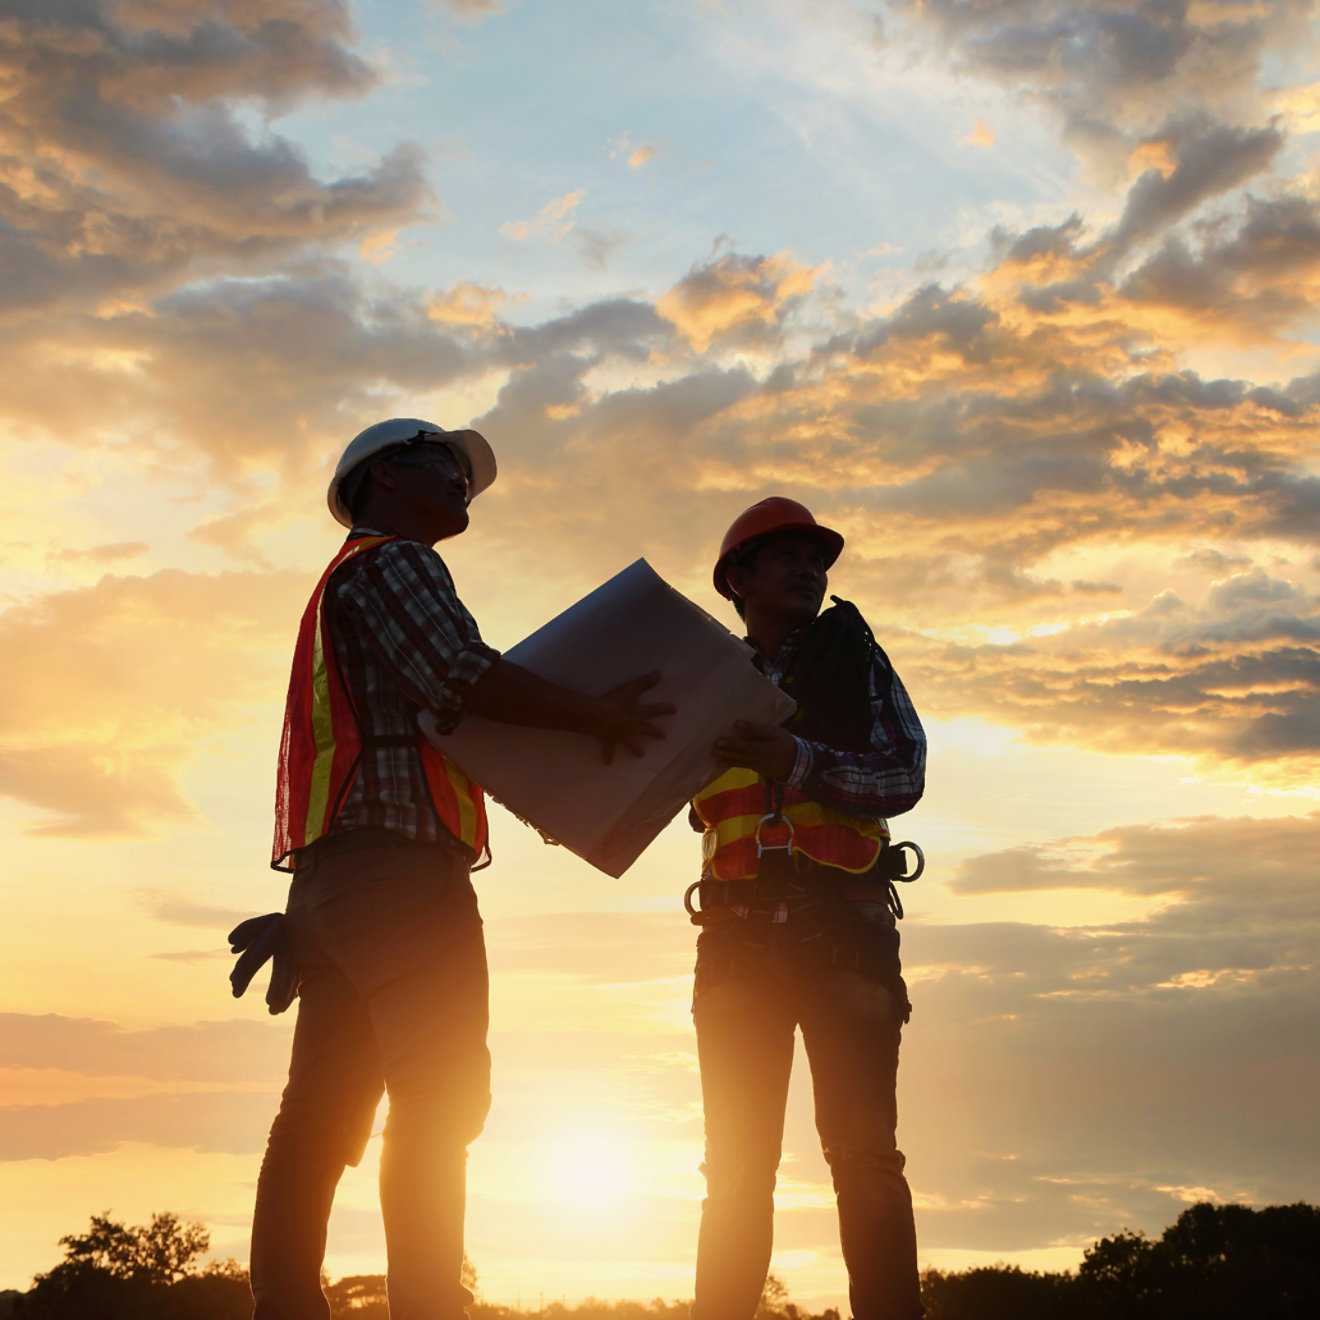 Construction workers with sunset